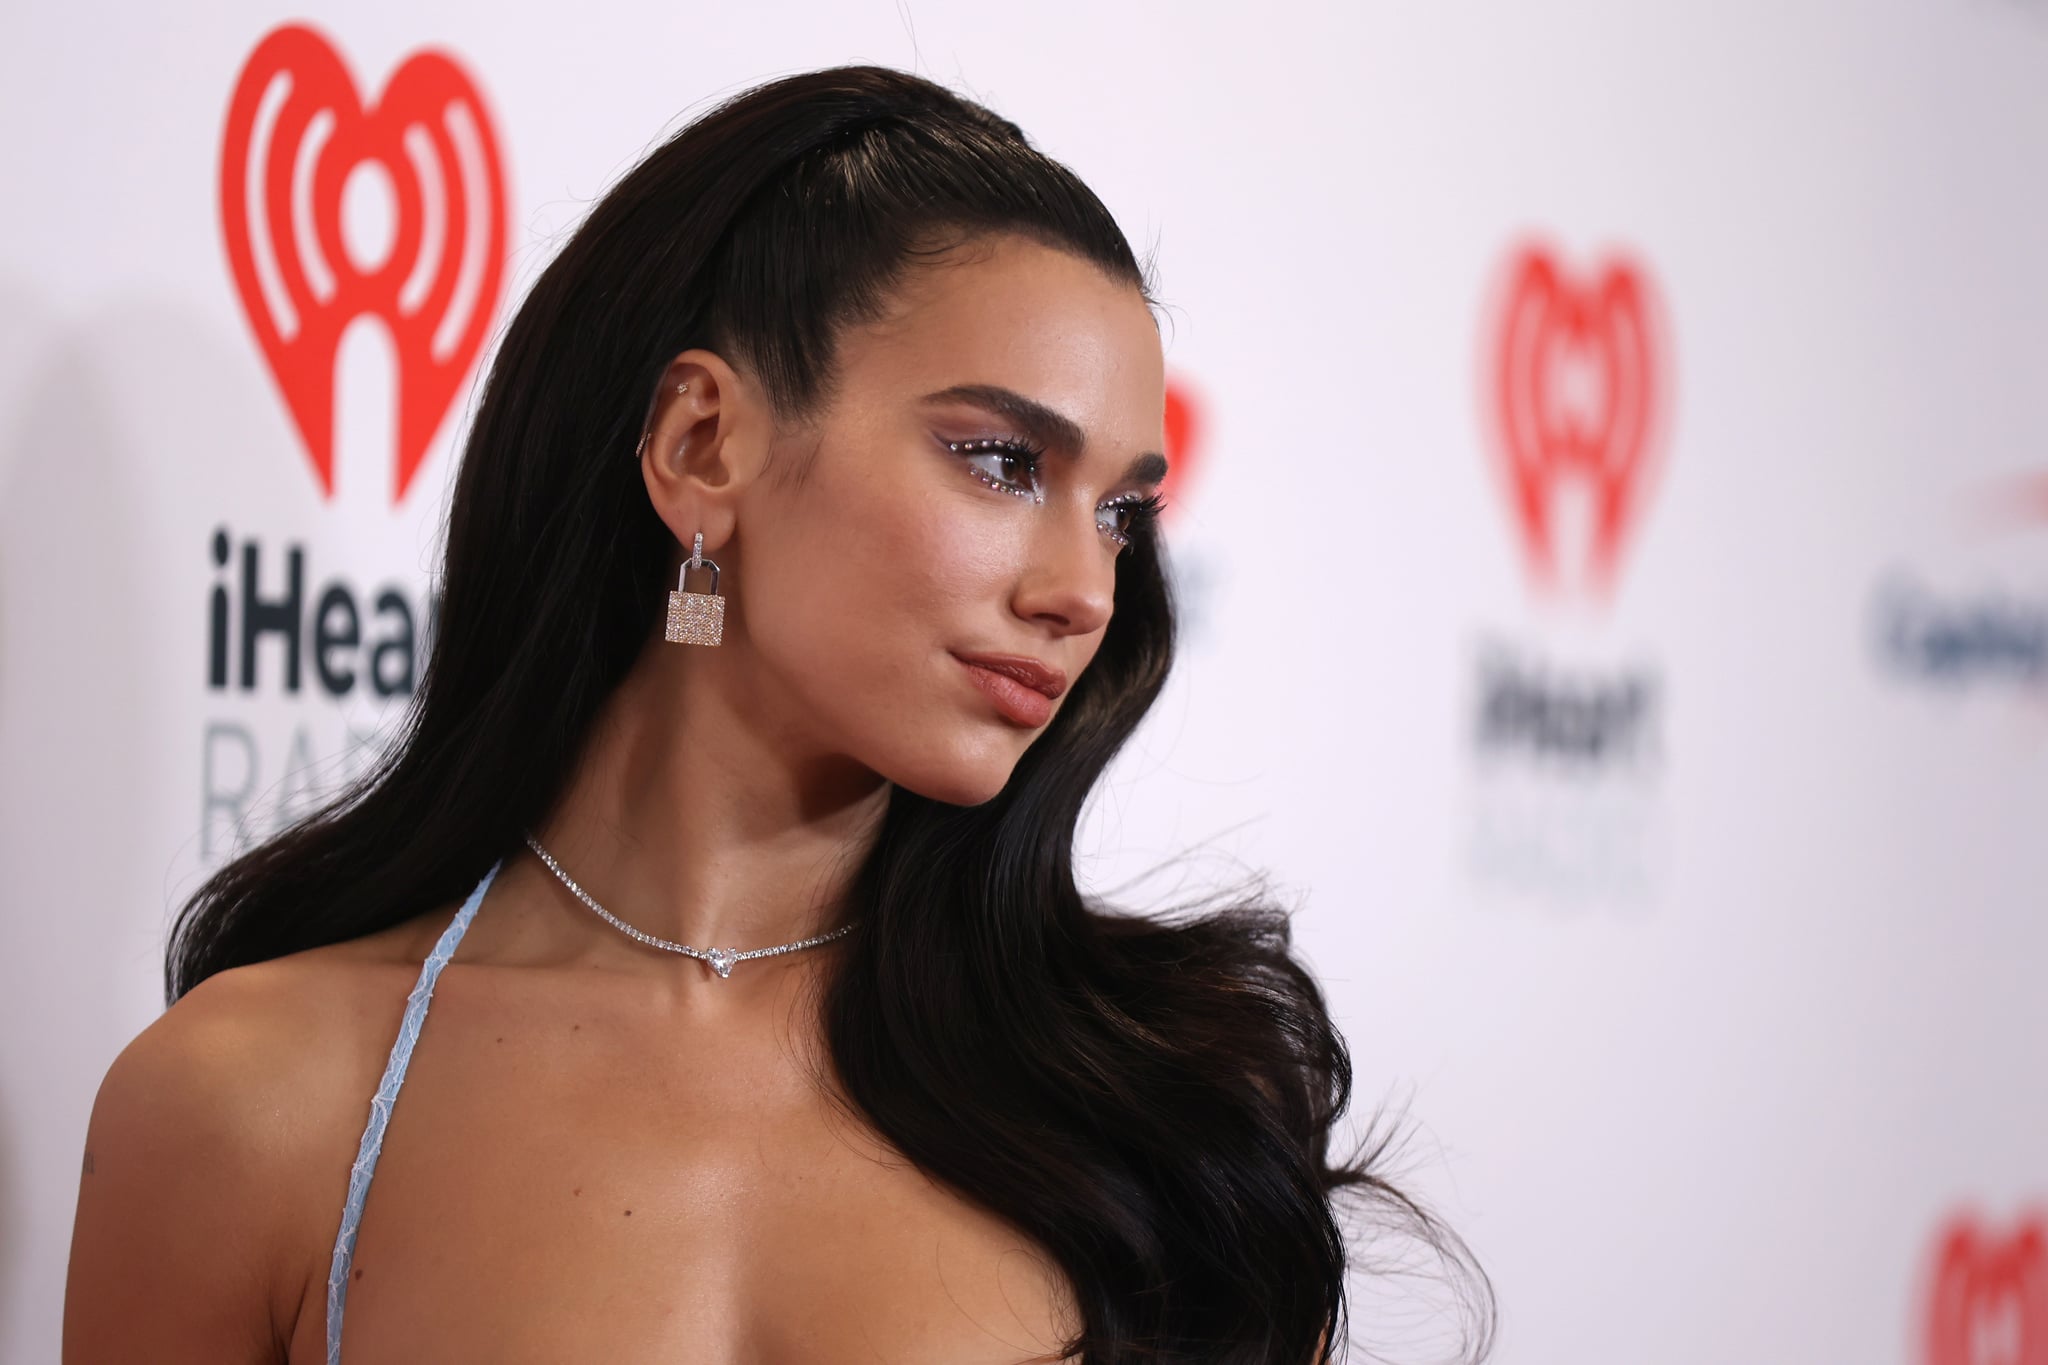 LAS VEGAS, NEVADA - SEPTEMBER 17: Dua Lipa attends the 2021 iHeartRadio Music Festival on September 17, 2021 at T-Mobile Arena in Las Vegas, Nevada. EDITORIAL USE ONLY (Photo by Isaac Brekken/Getty Images for iHeartMedia)